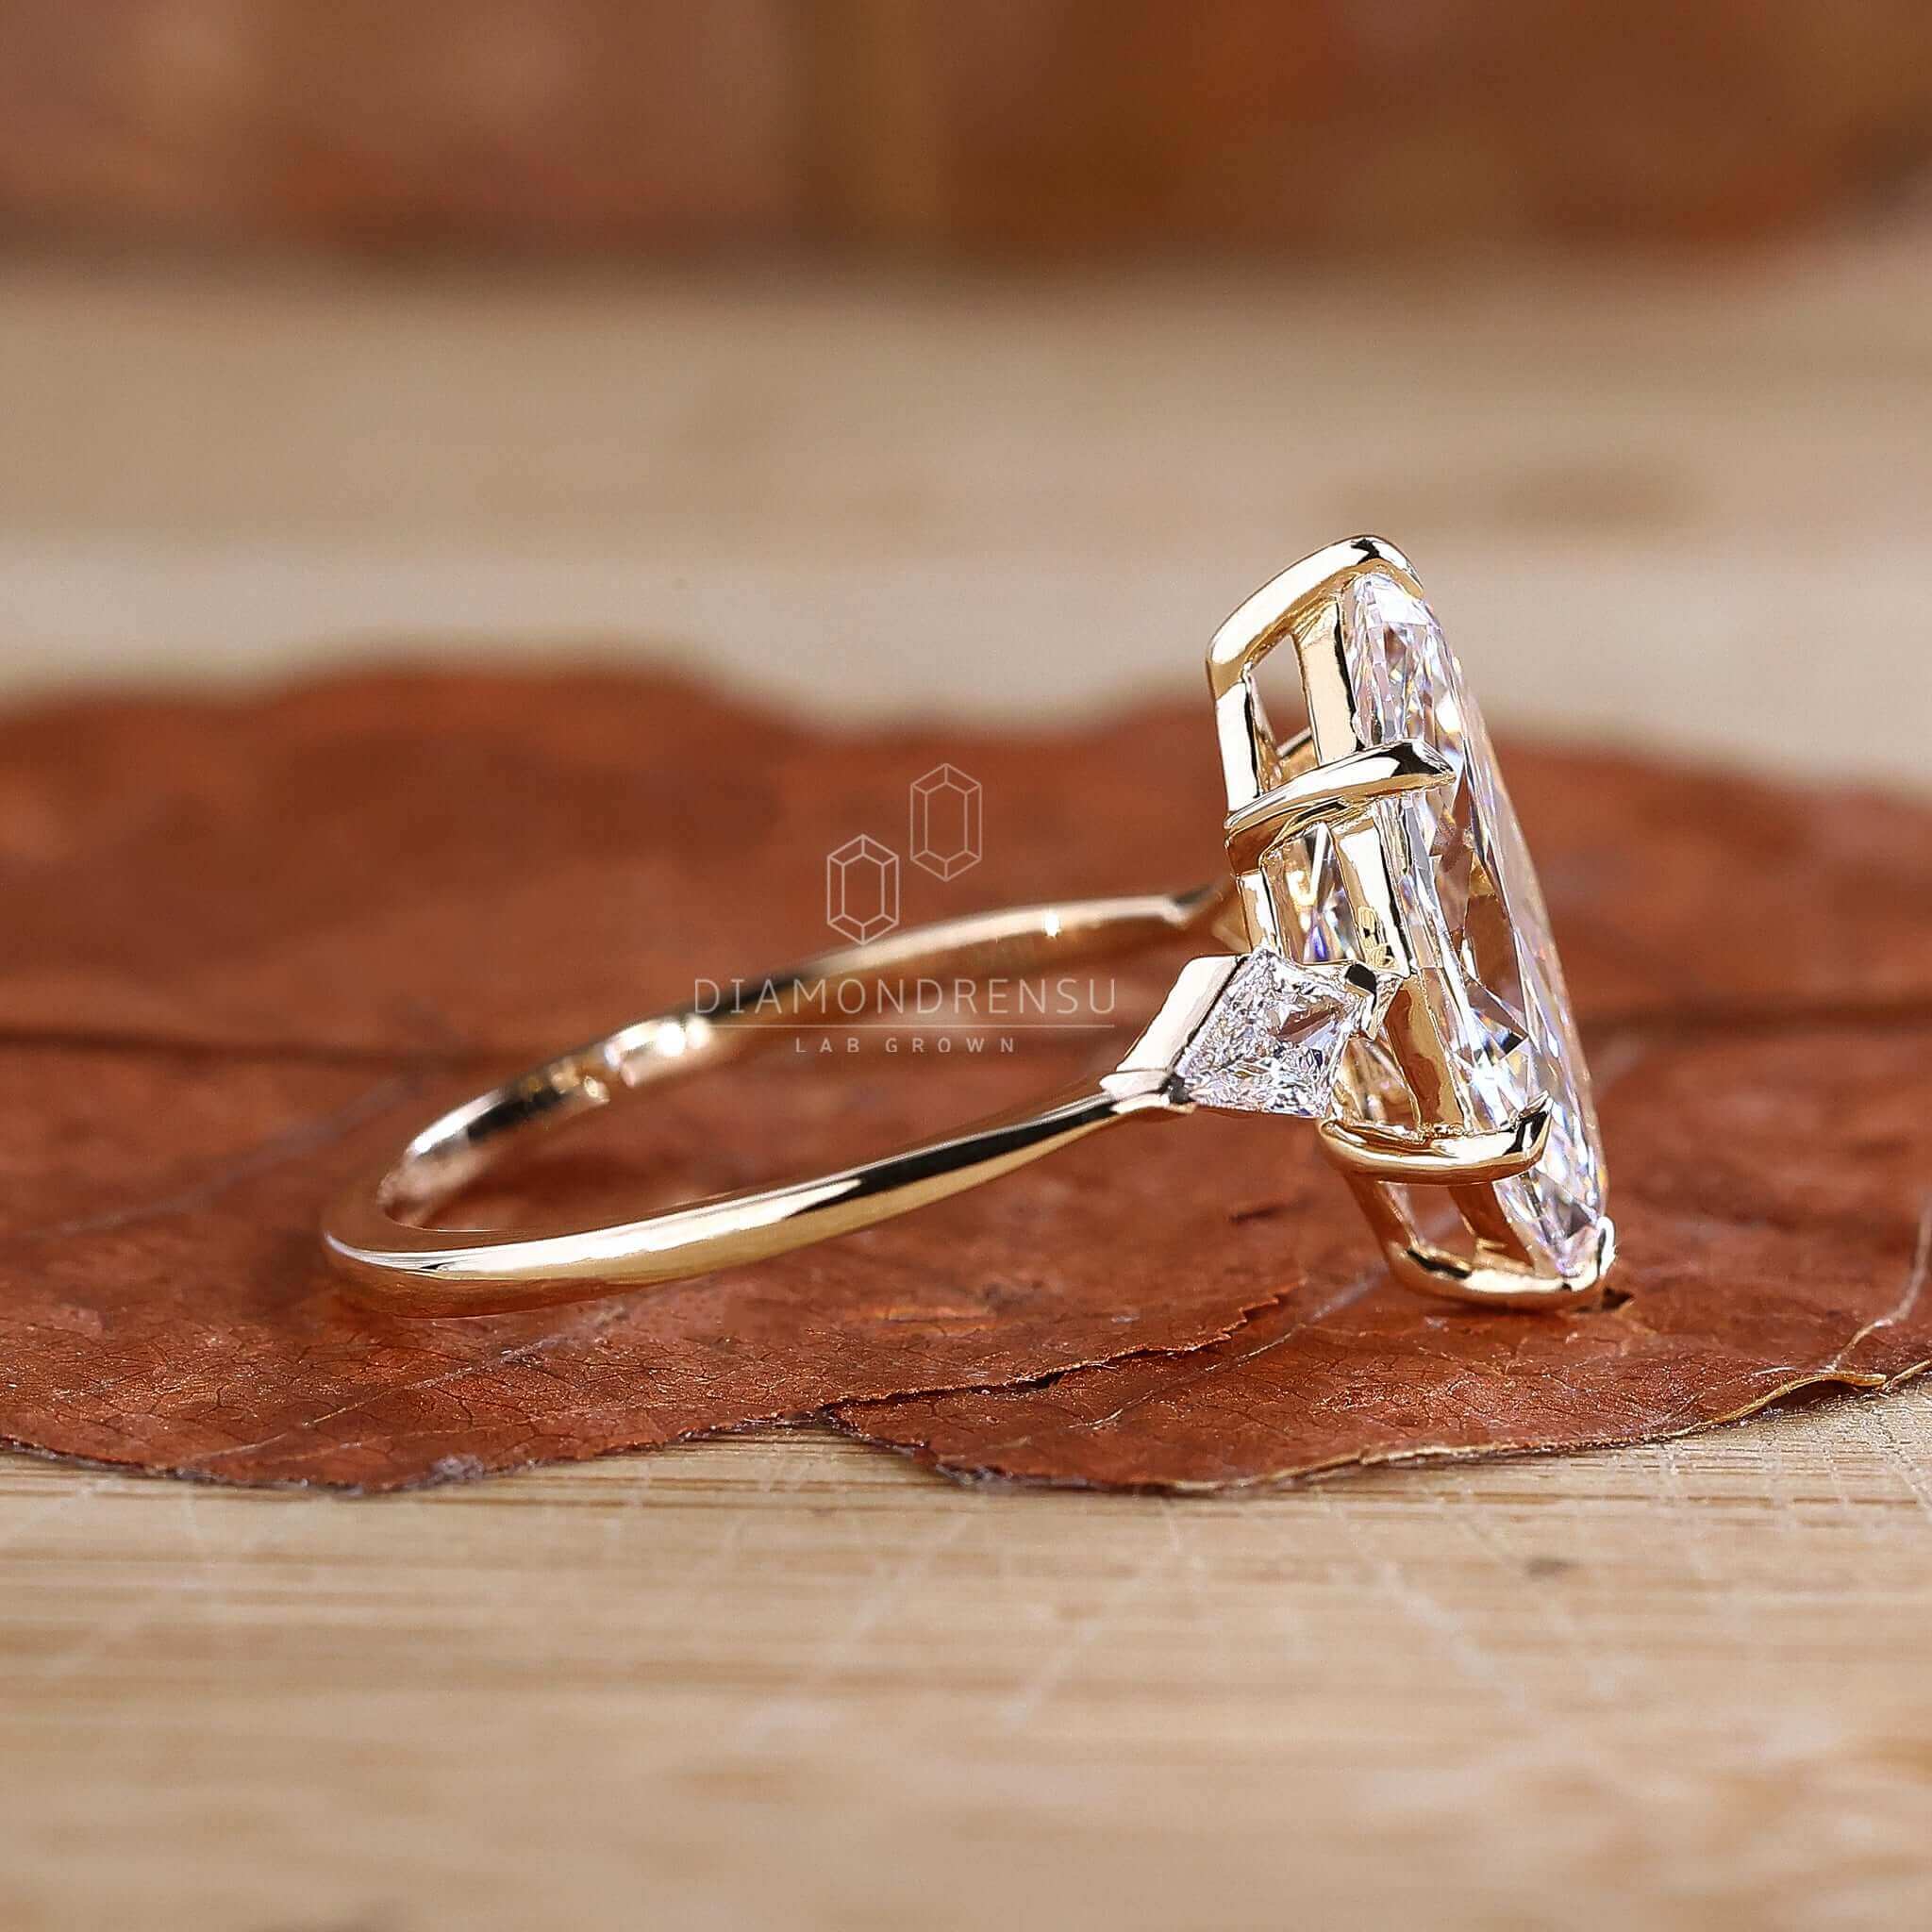 A lab-grown diamond engagement ring, a sustainable and stunning choice.